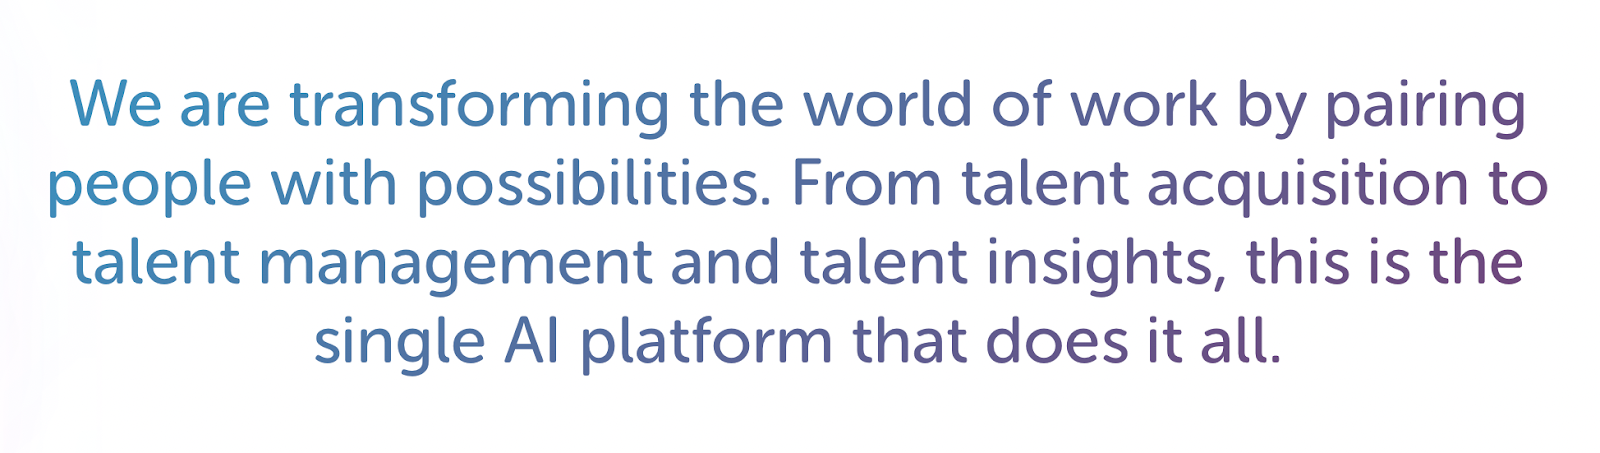 We are transforming the world of work by pairing people with possibilities. From talent acquisition to talent management and talent insights, this is the single AI platform that does it all. 